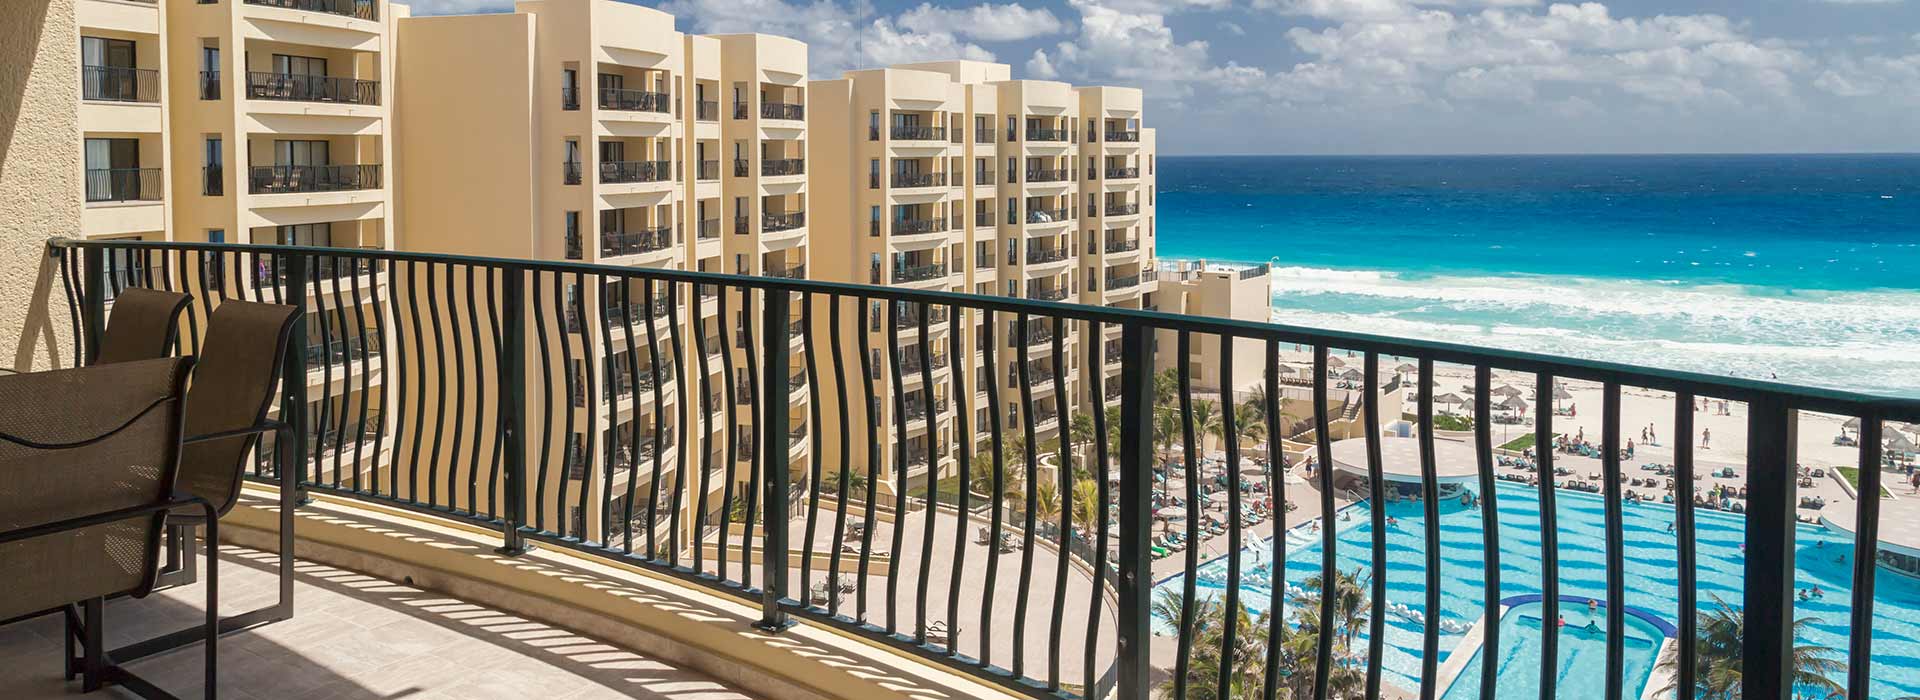 Ocean view villas one bedroom with private balcony in Cancun All Inclusive Resort